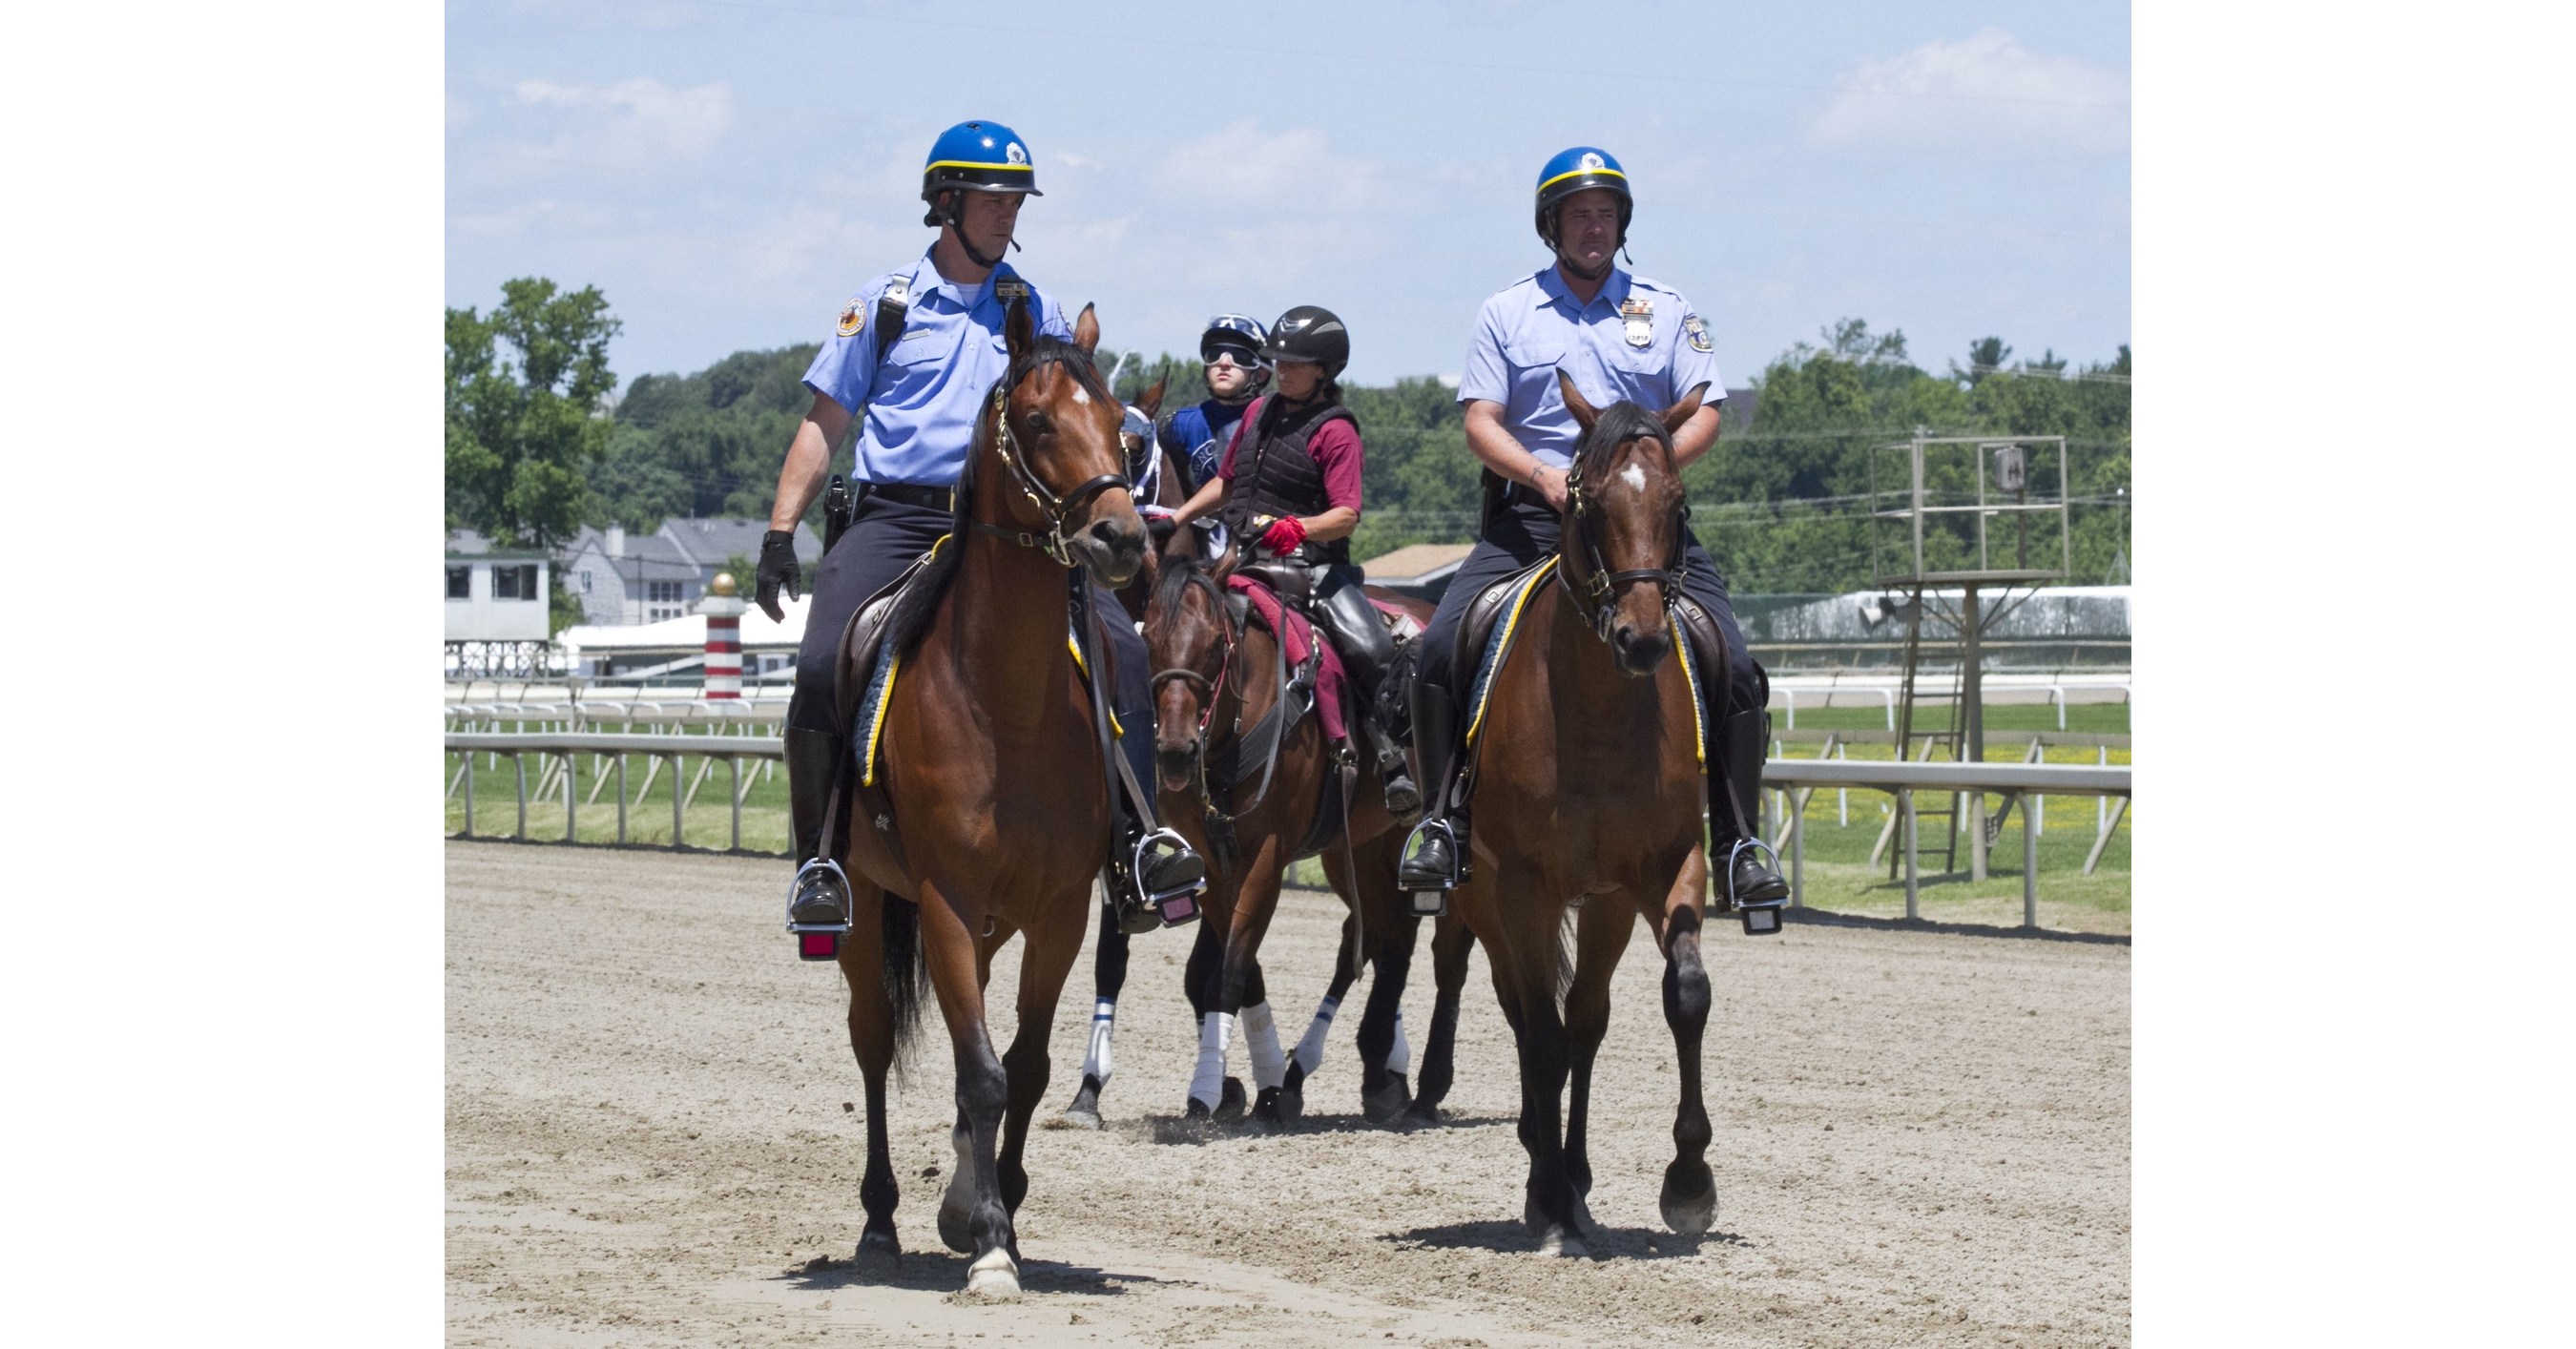 LIFE AFTER HORSE RACING: AFTERCARE PROGRAMS ENSURE FULFILLING SECOND CAREERS FOR PENNSYLVANIA RACEHORSES